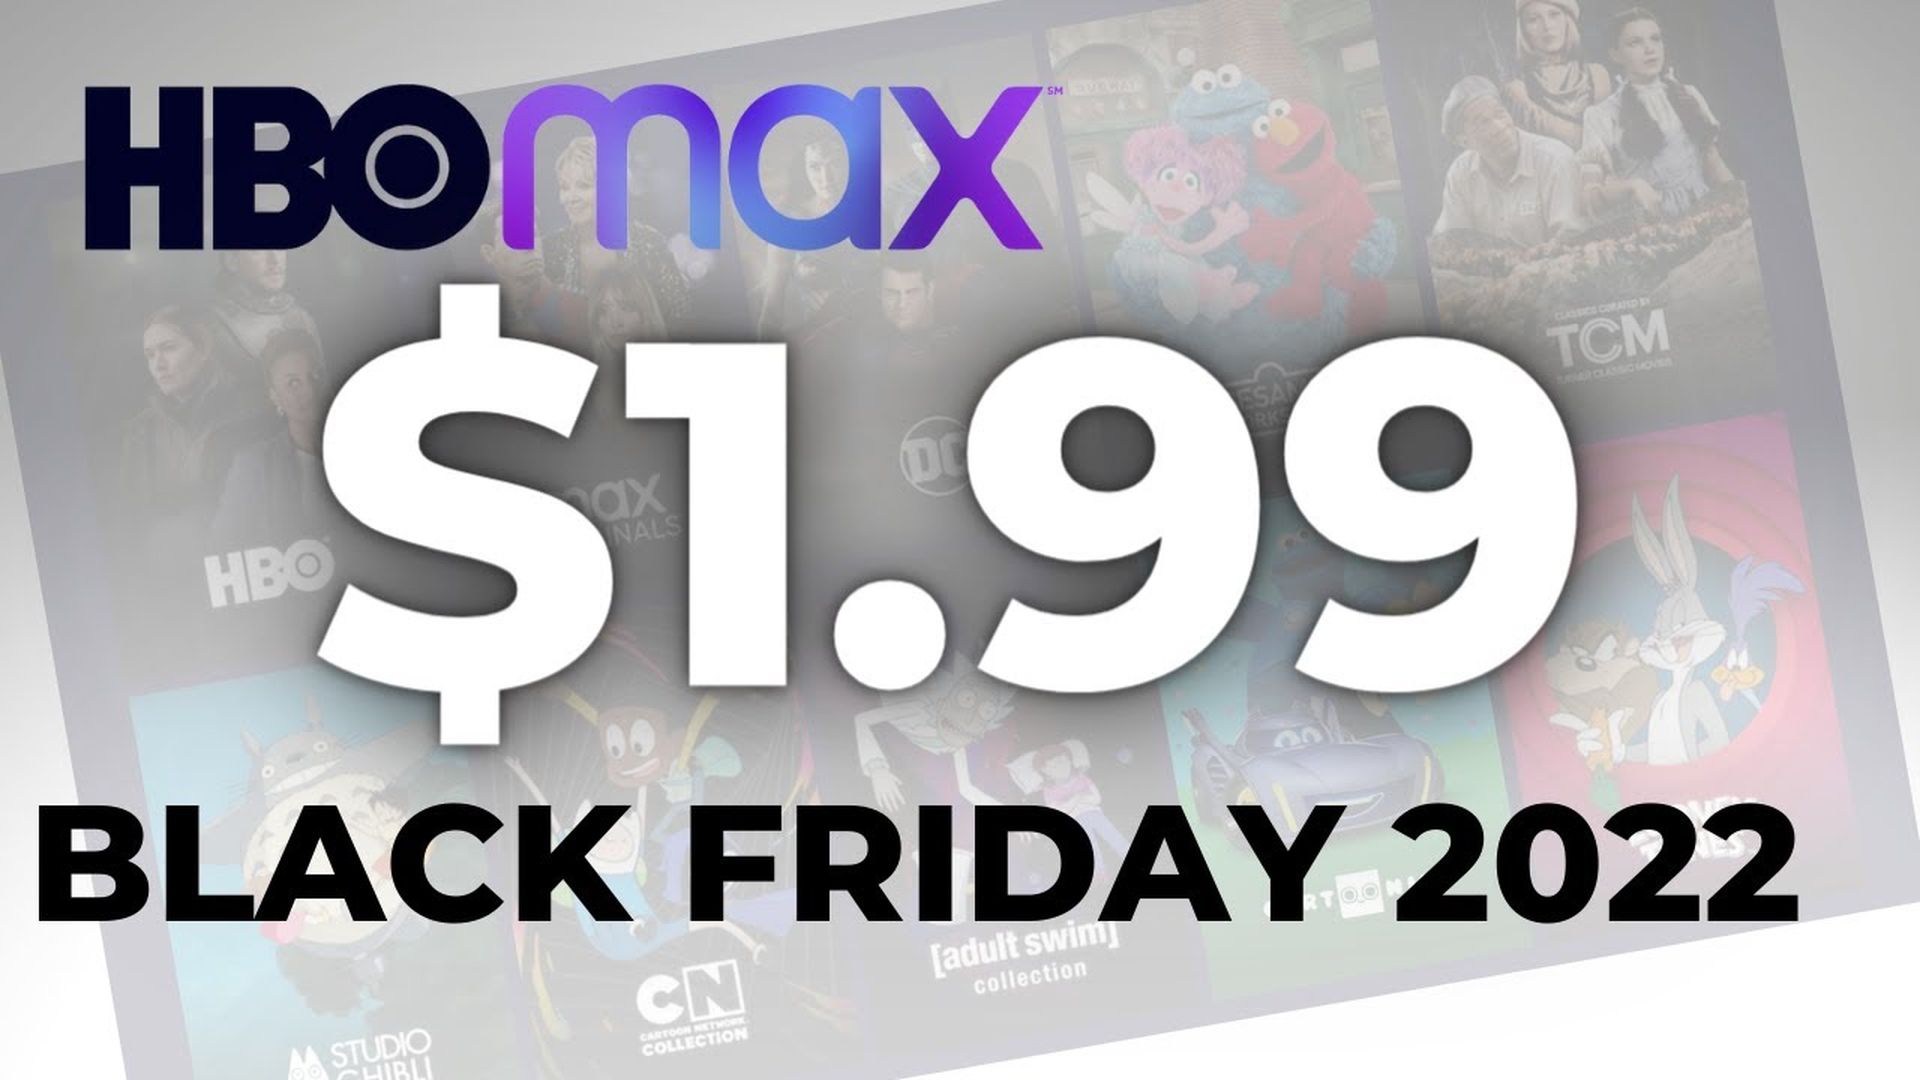 HBO Max Black Friday deal